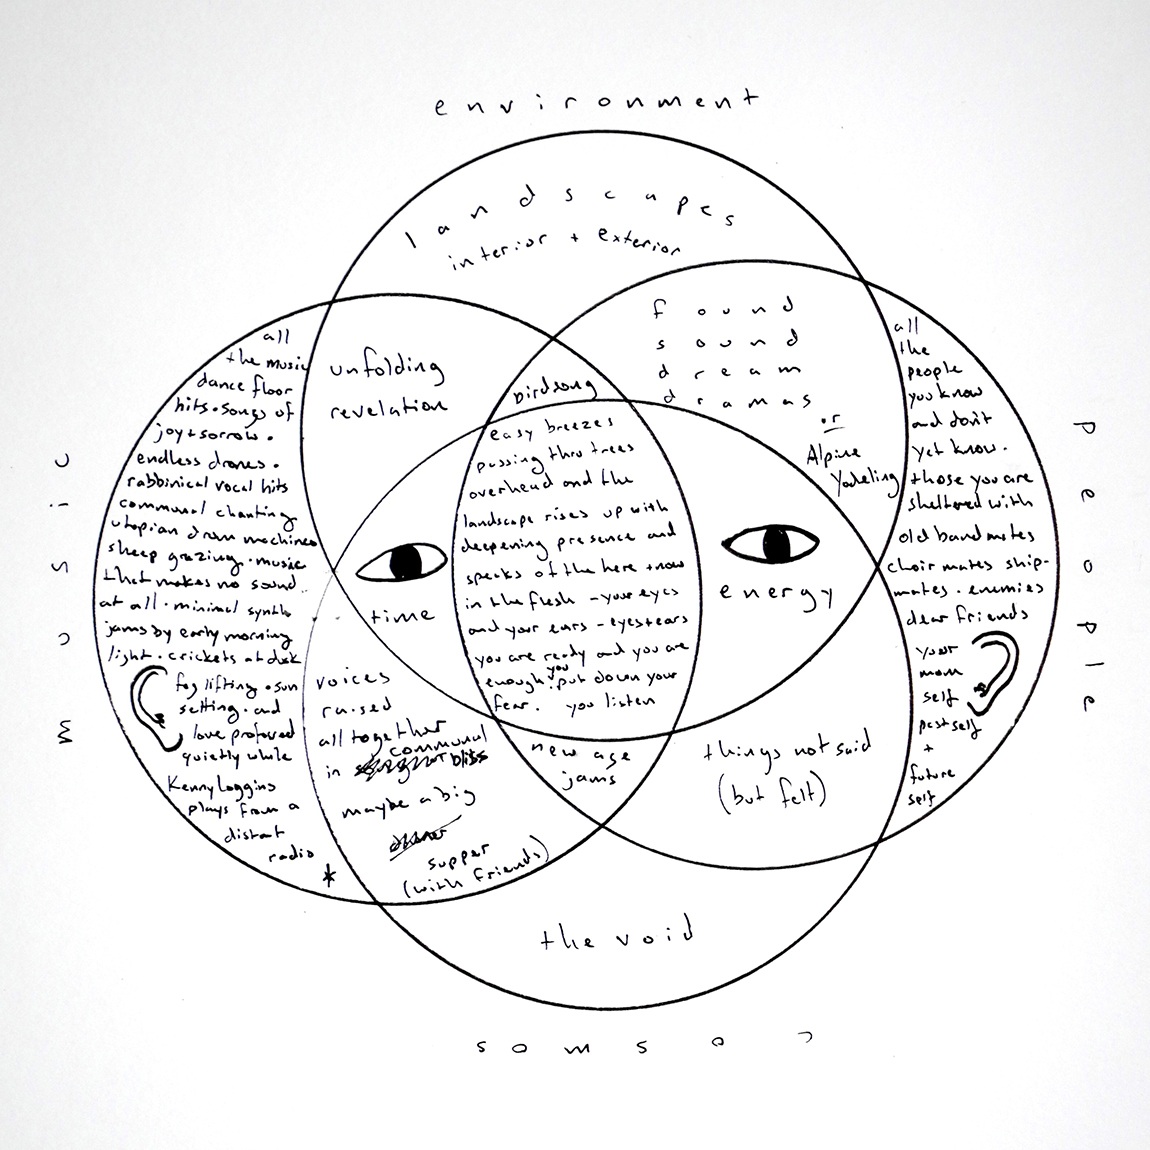 A pen-and-paper diagram by Chris Kallmyer, "all the sounds."